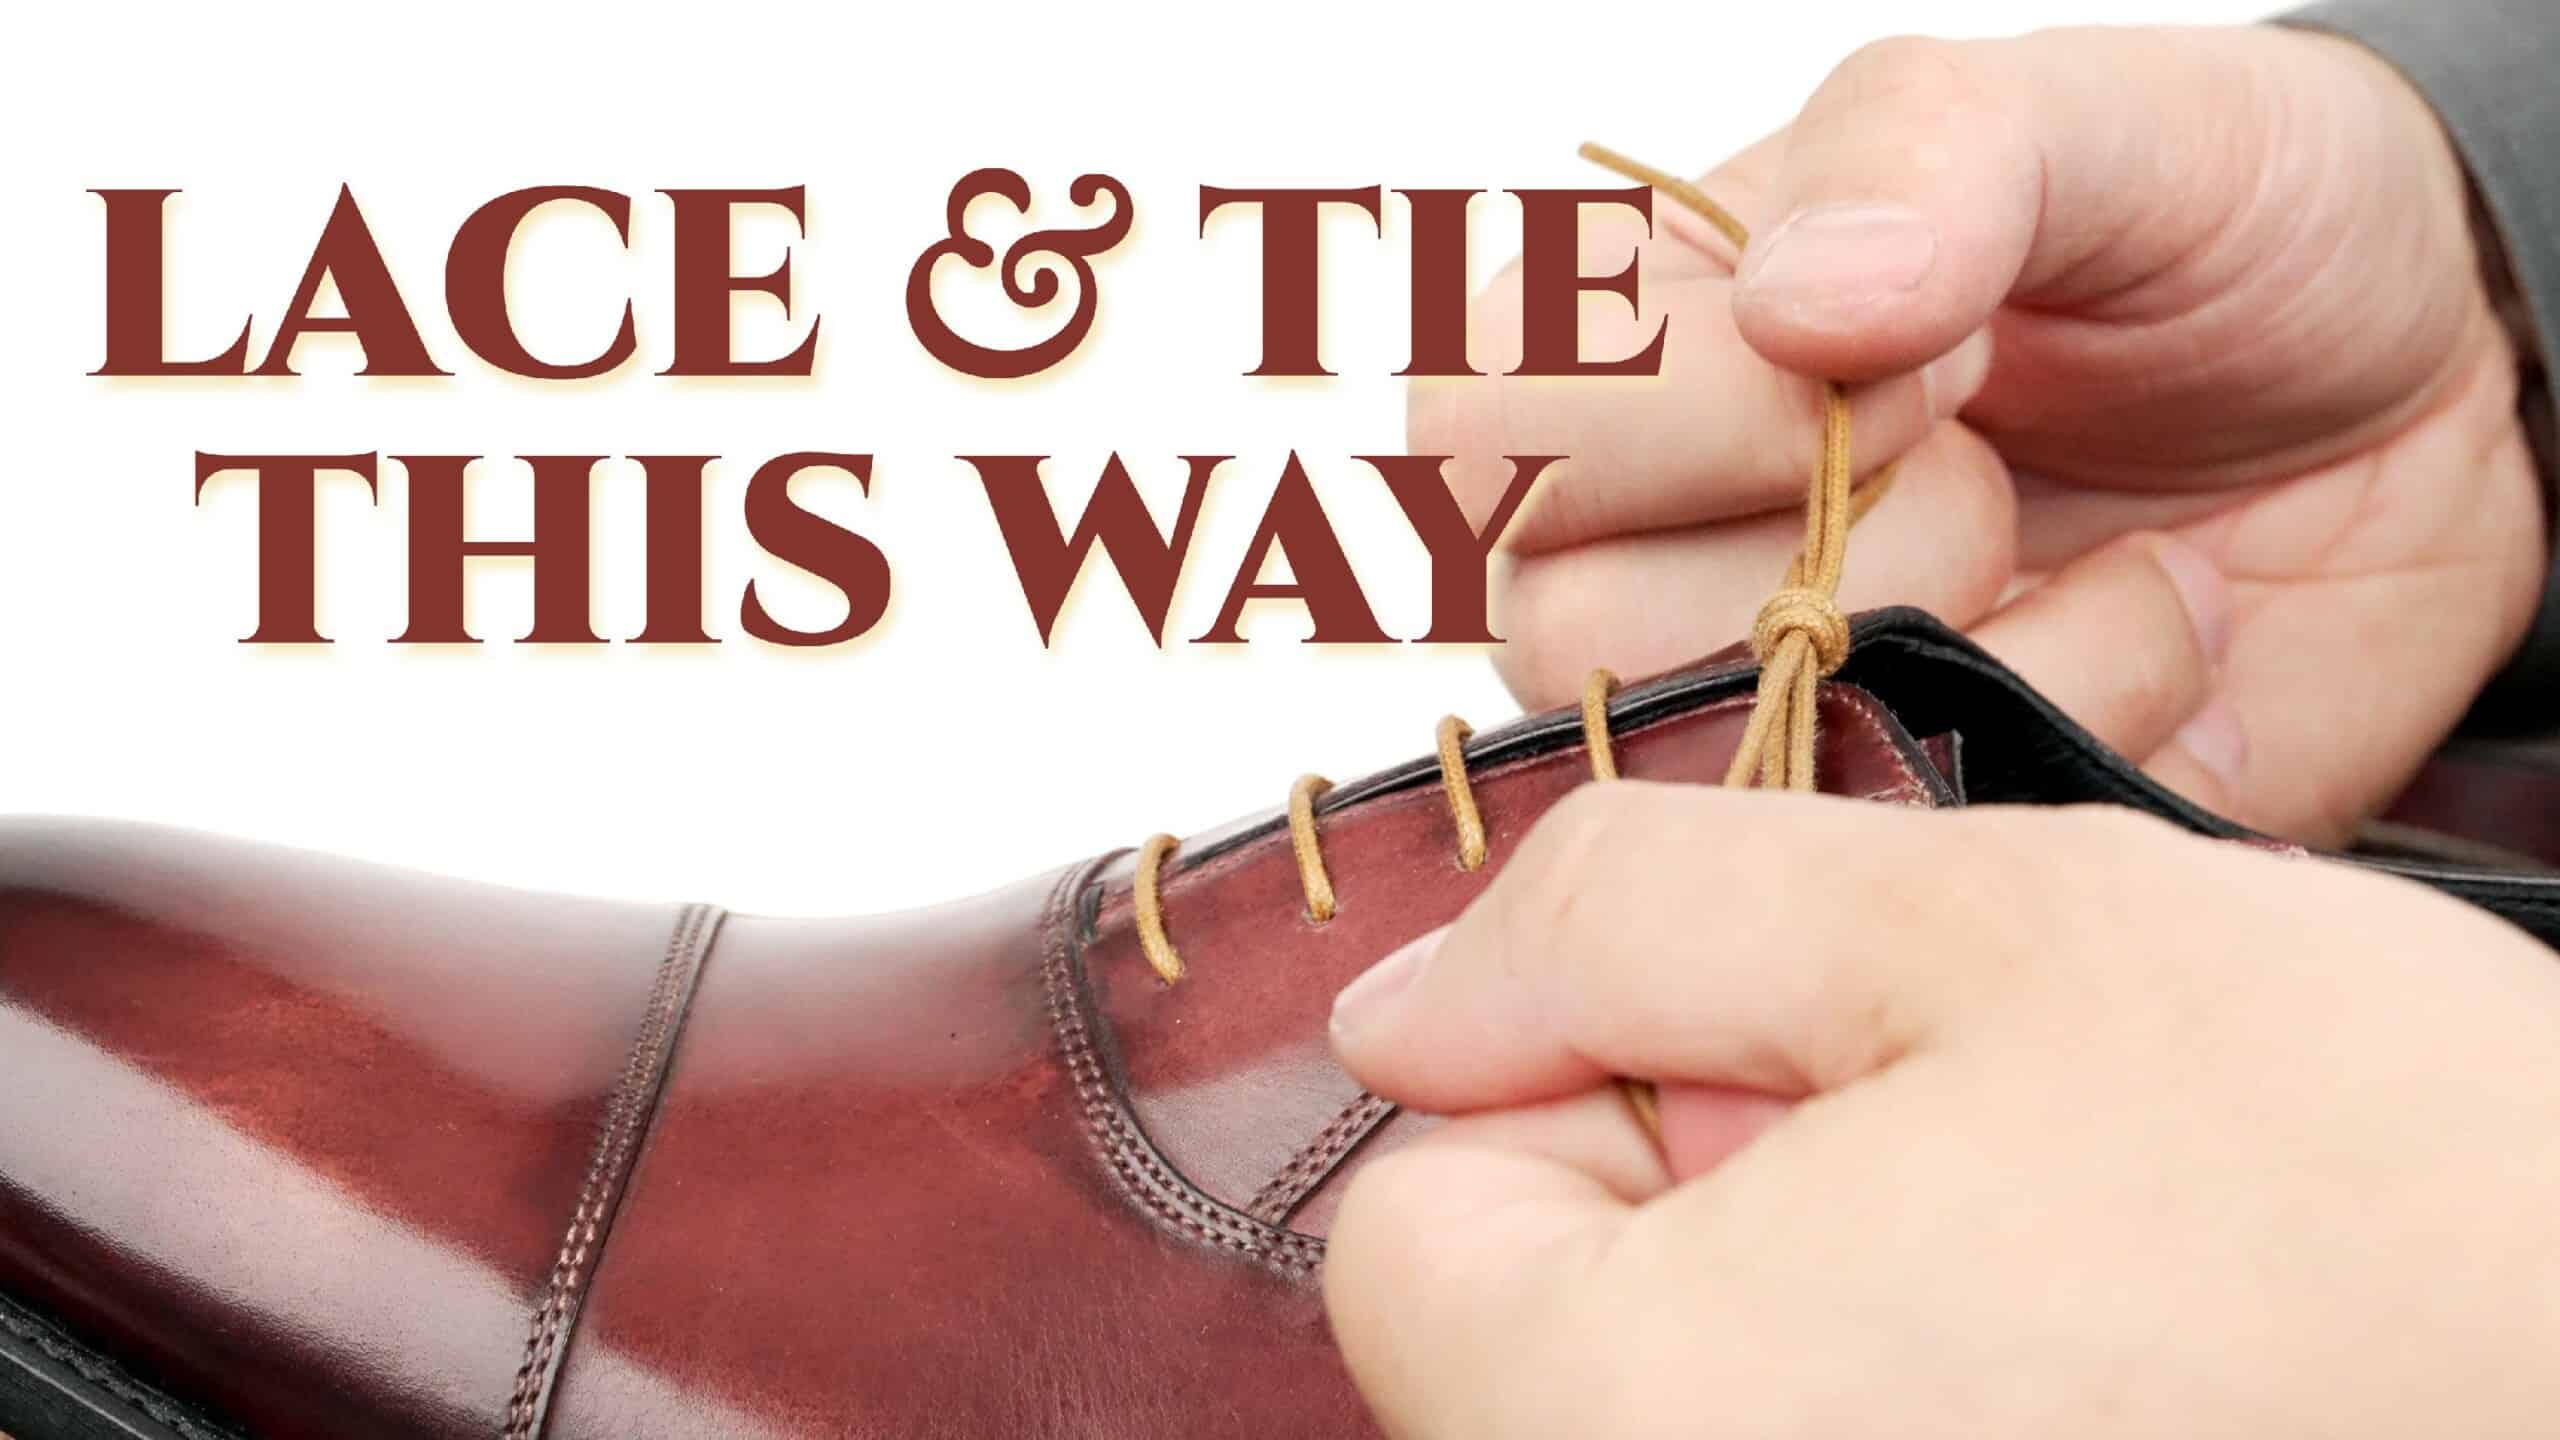 How To Tie Your Shoes  Buy 2 Get 1 Free Shoelace Sale